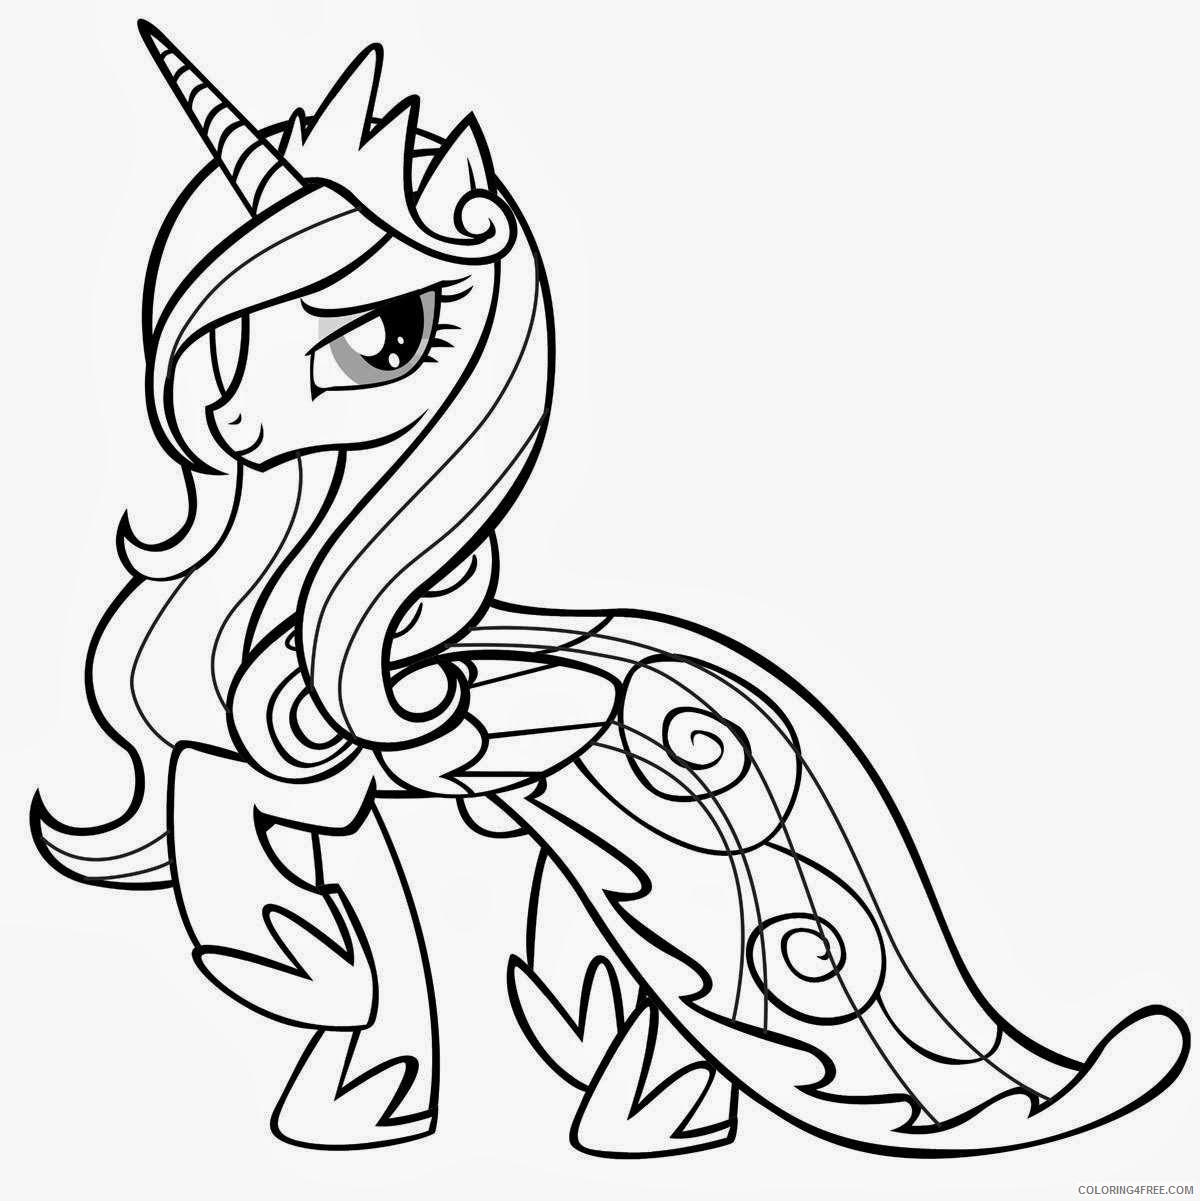 My Little Pony Coloring Pages Cartoons My Little Pony Free Printable 2020 4506 Coloring4free